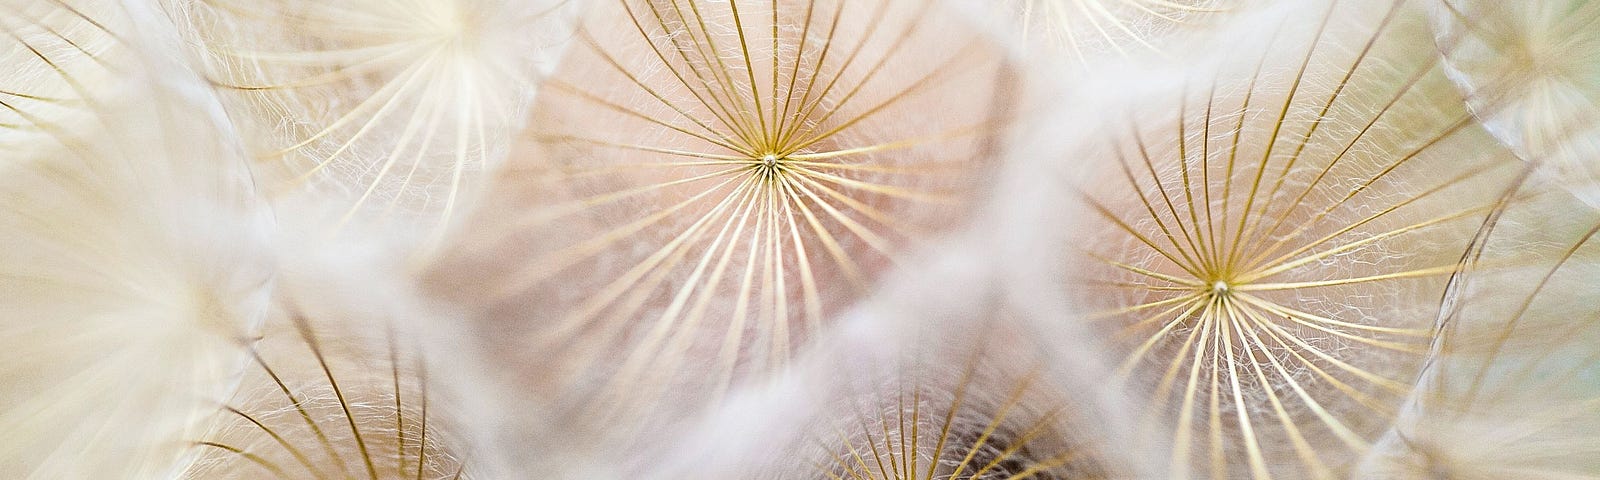 Photo of a kaleidoscope view of a dandelion from Unsplash